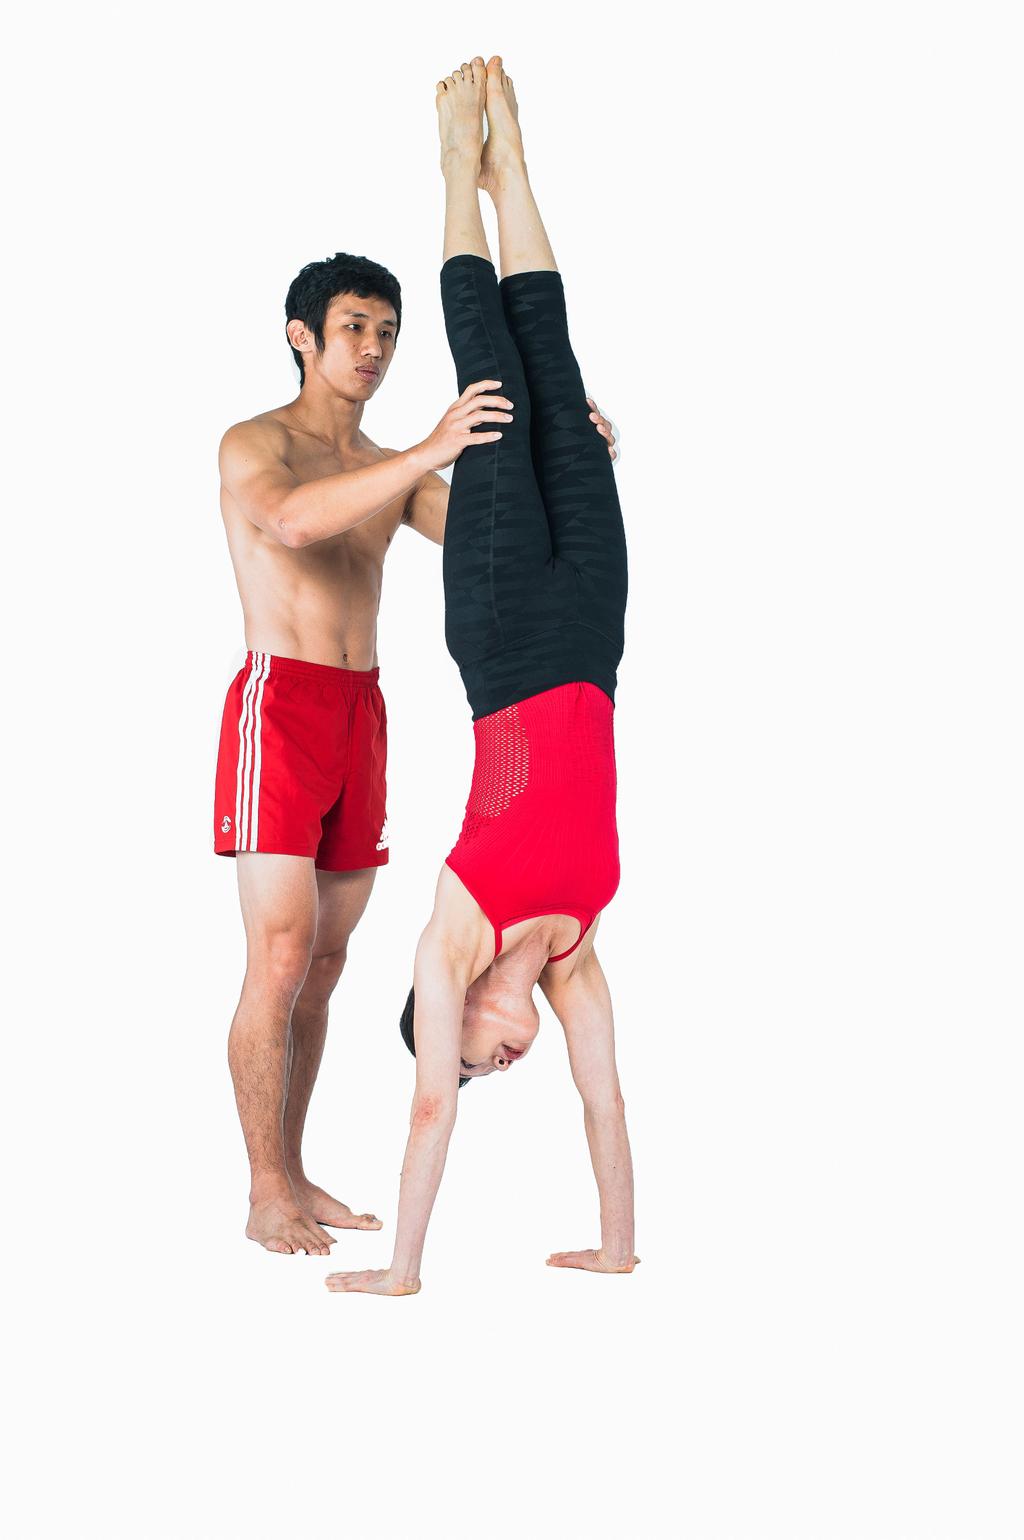 Ways to make sure you achieve your handstand What no one tells you about